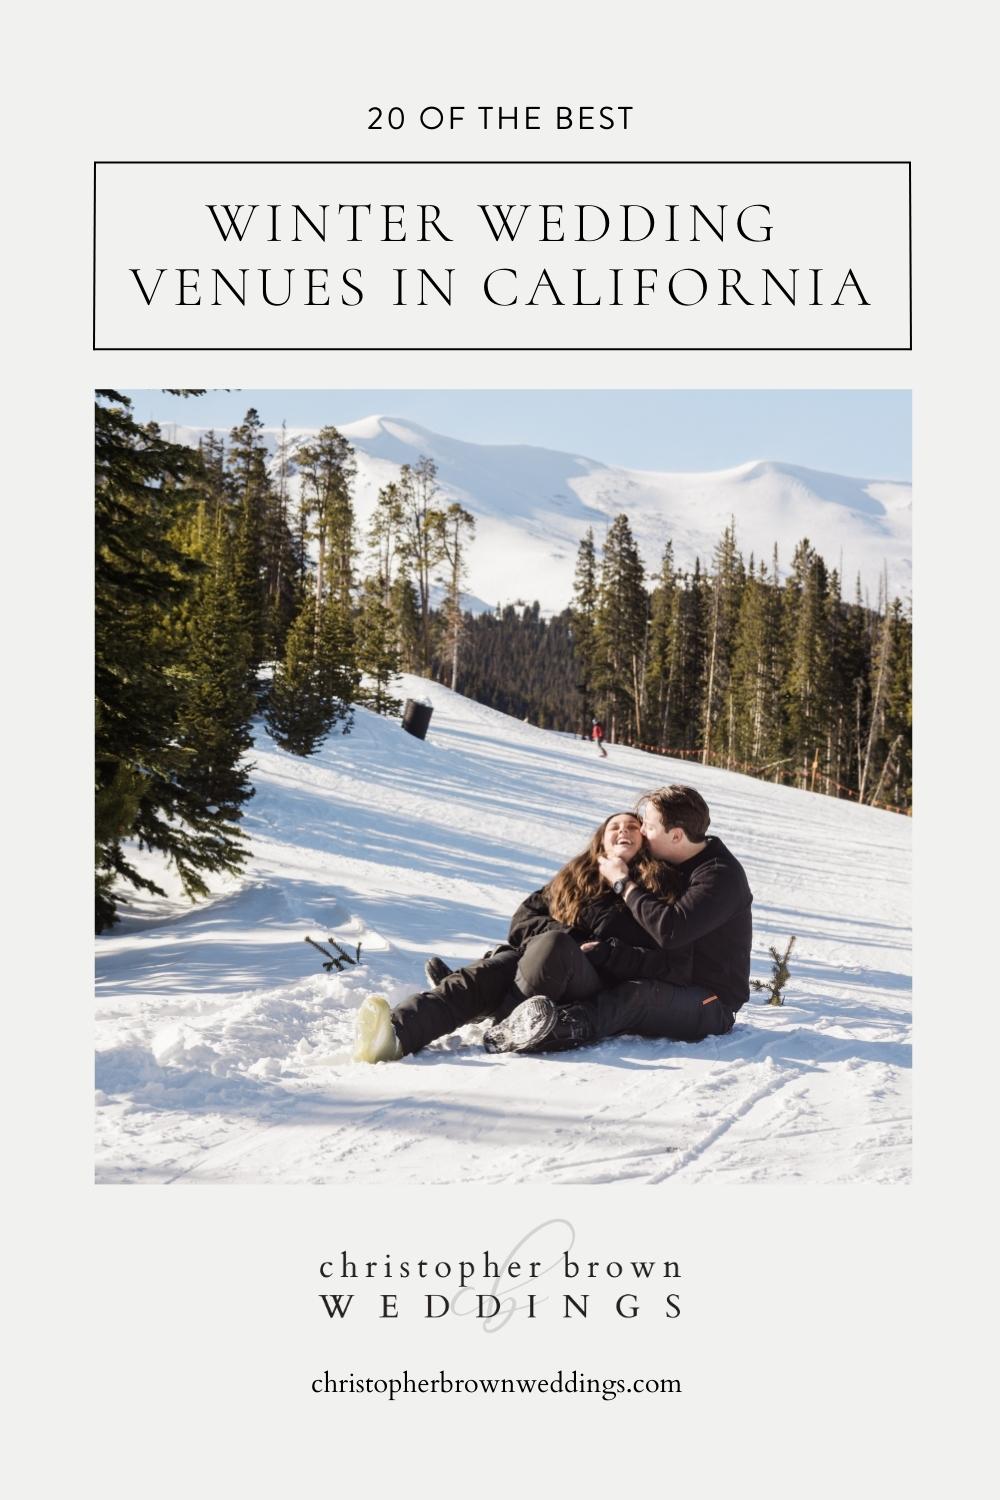 Couple sitting on the snow at a ski resort; image overlaid with text that reads 20 Of The Best Winter Wedding Venues in California